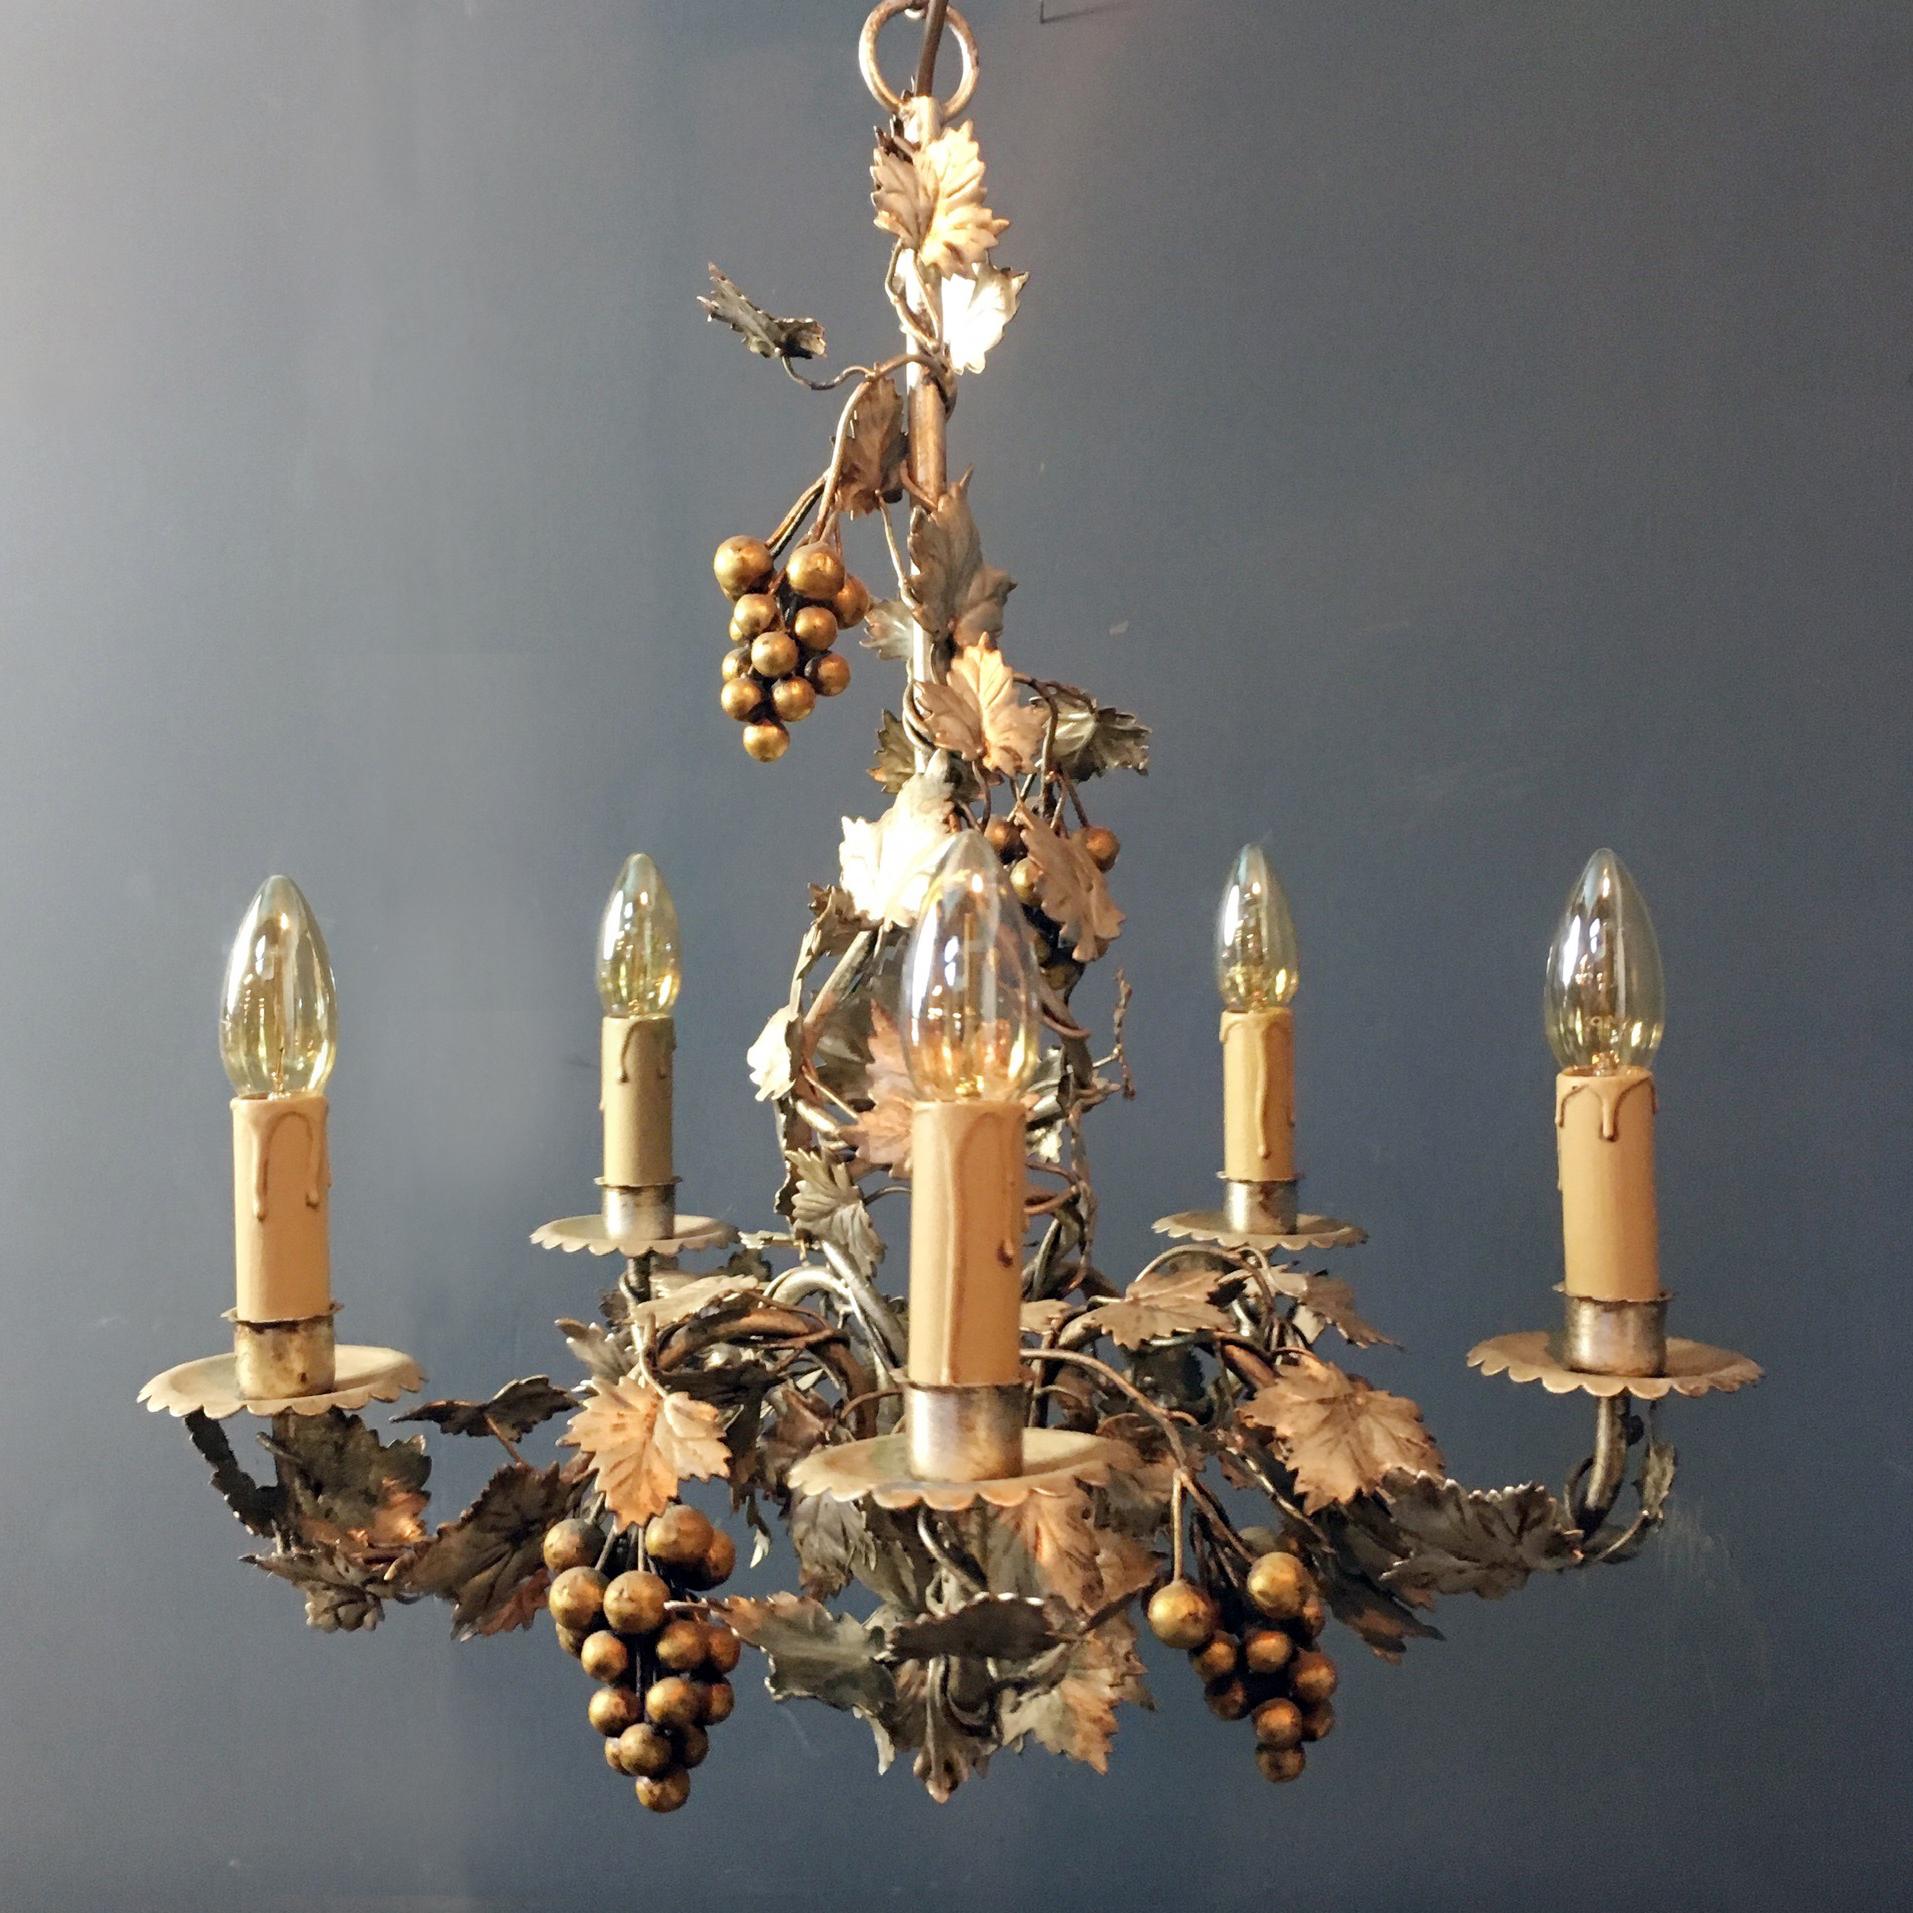 Beautiful french tole light featuring bunches of gold grapes placed among silver grape vines and leaves.

This is a rare tole light as silver is unusual, the silver is very pale and soft in color with the gold, beautiful.

This is a vintage